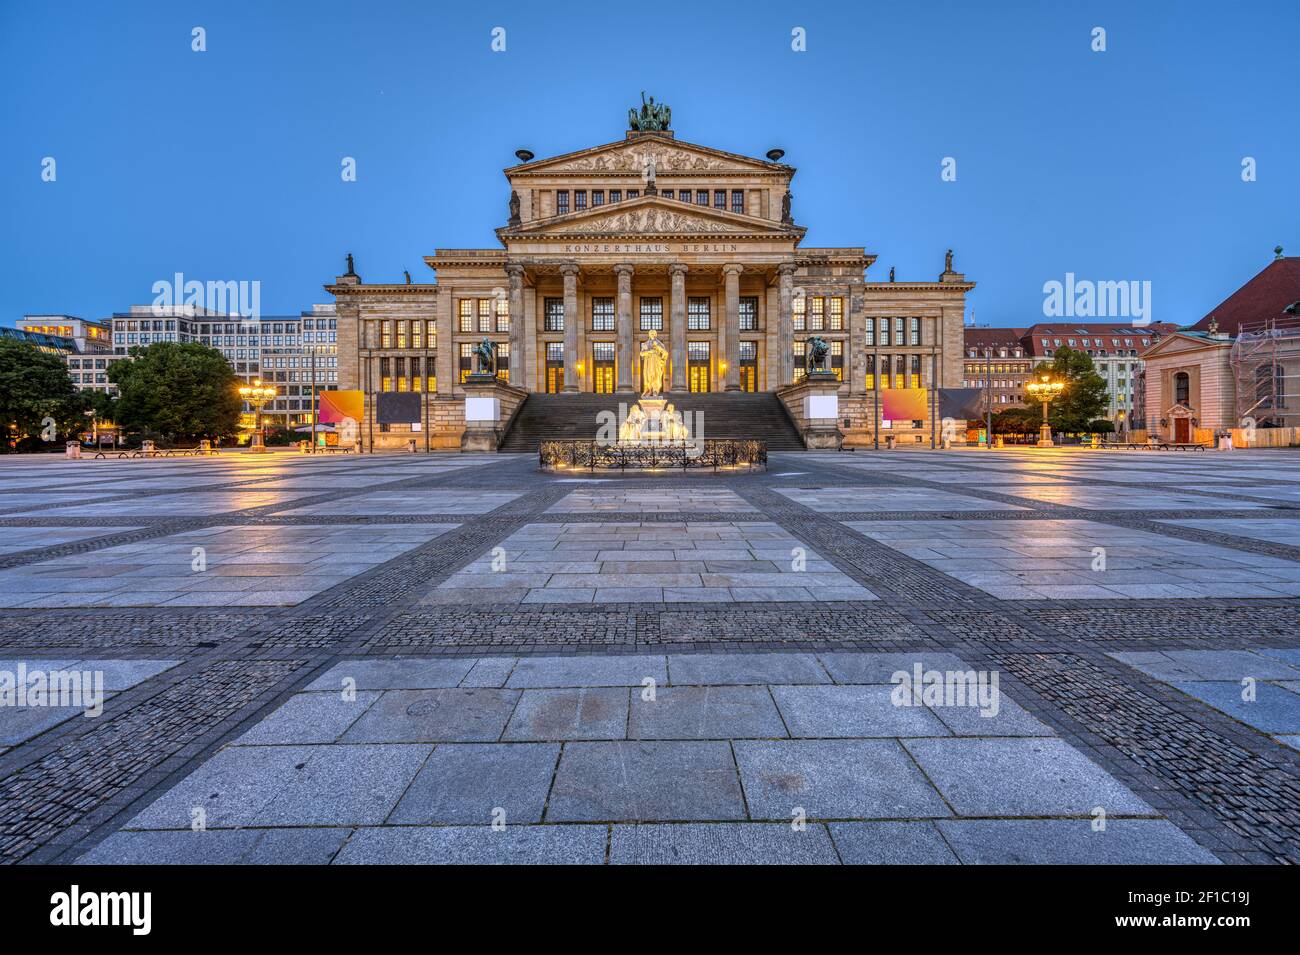 The beautiful Gendarmenmarkt in Berlin at dawn with no people Stock Photo